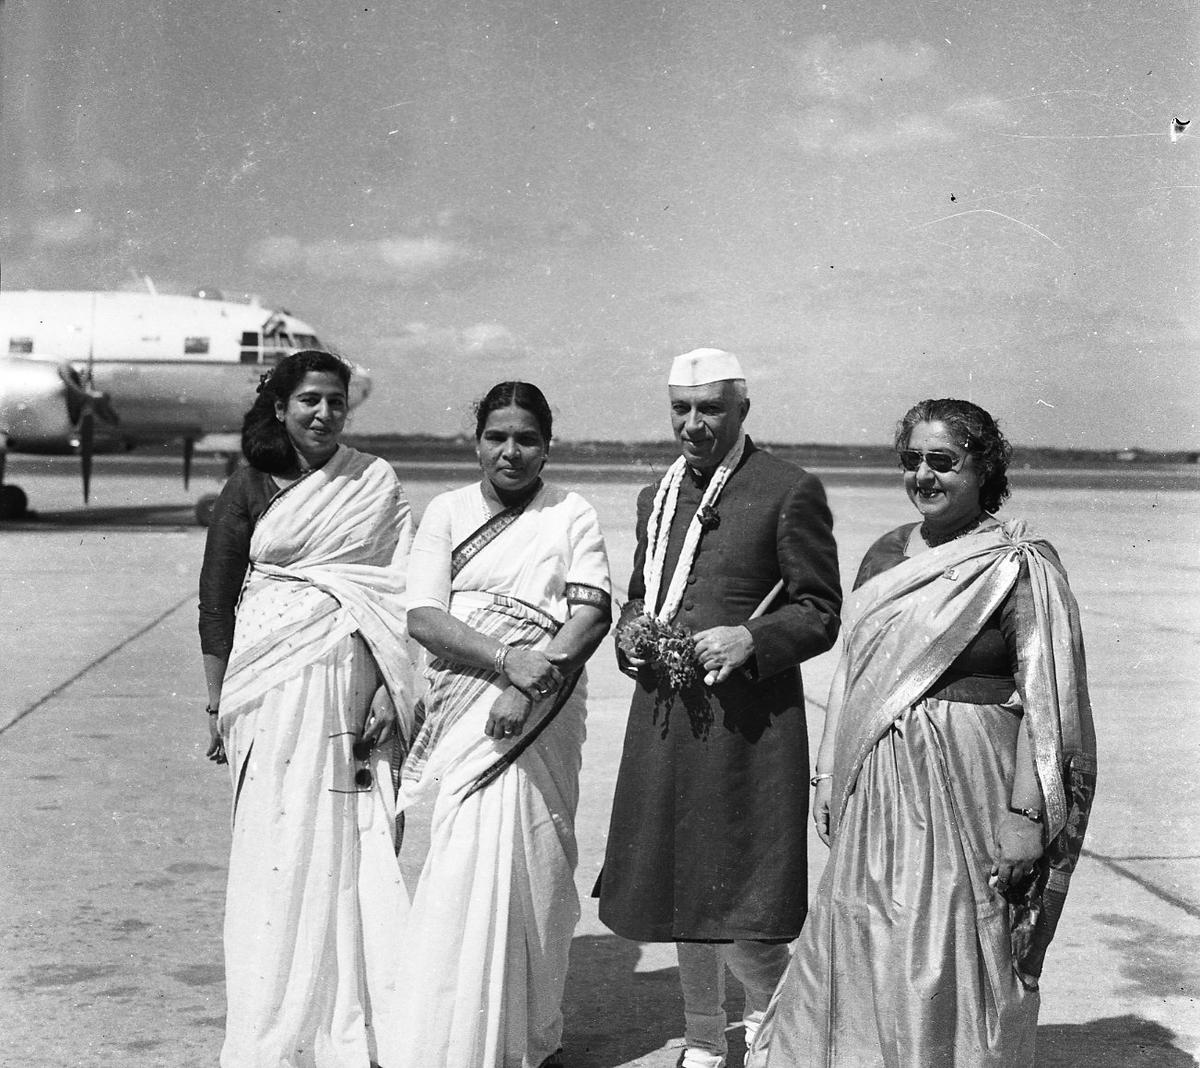 India's first Prime Minister, Jawaharlal Nehru, who arrived in Madras on December 7, 1957, is seen with (from left) the Mayor, Tara Cherian, Lourdhammal Simon, Minister, and the Sheriff Mary Clubwala Jadhav, at the airport.